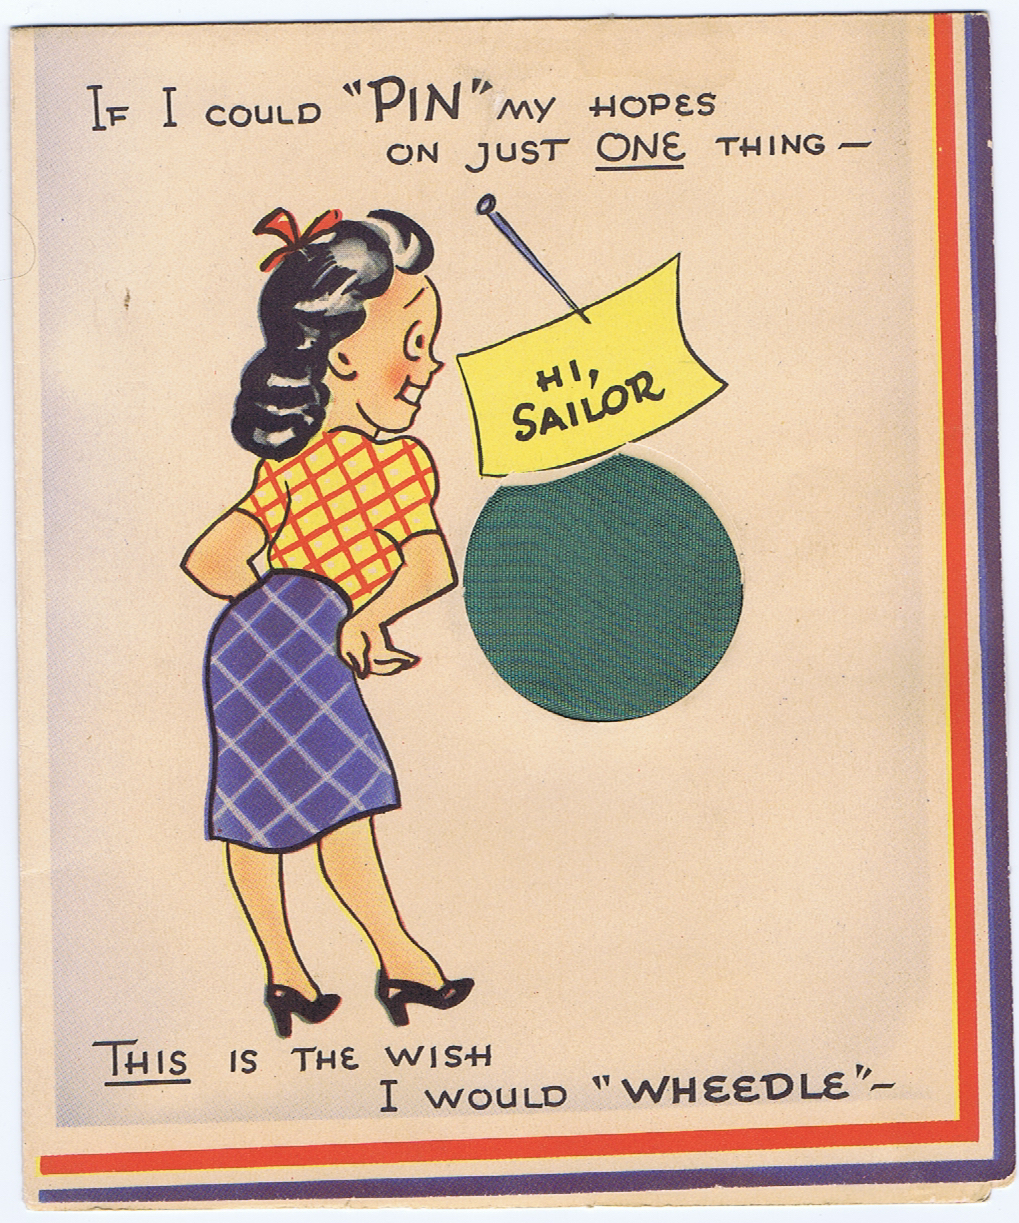 J788	WORLD WAR II GREETING CARD - IF I COULD “PIN” MY HOPES ON JUST ONE THING - THIS IS THE WISH I WOULD “WHEEDLE”